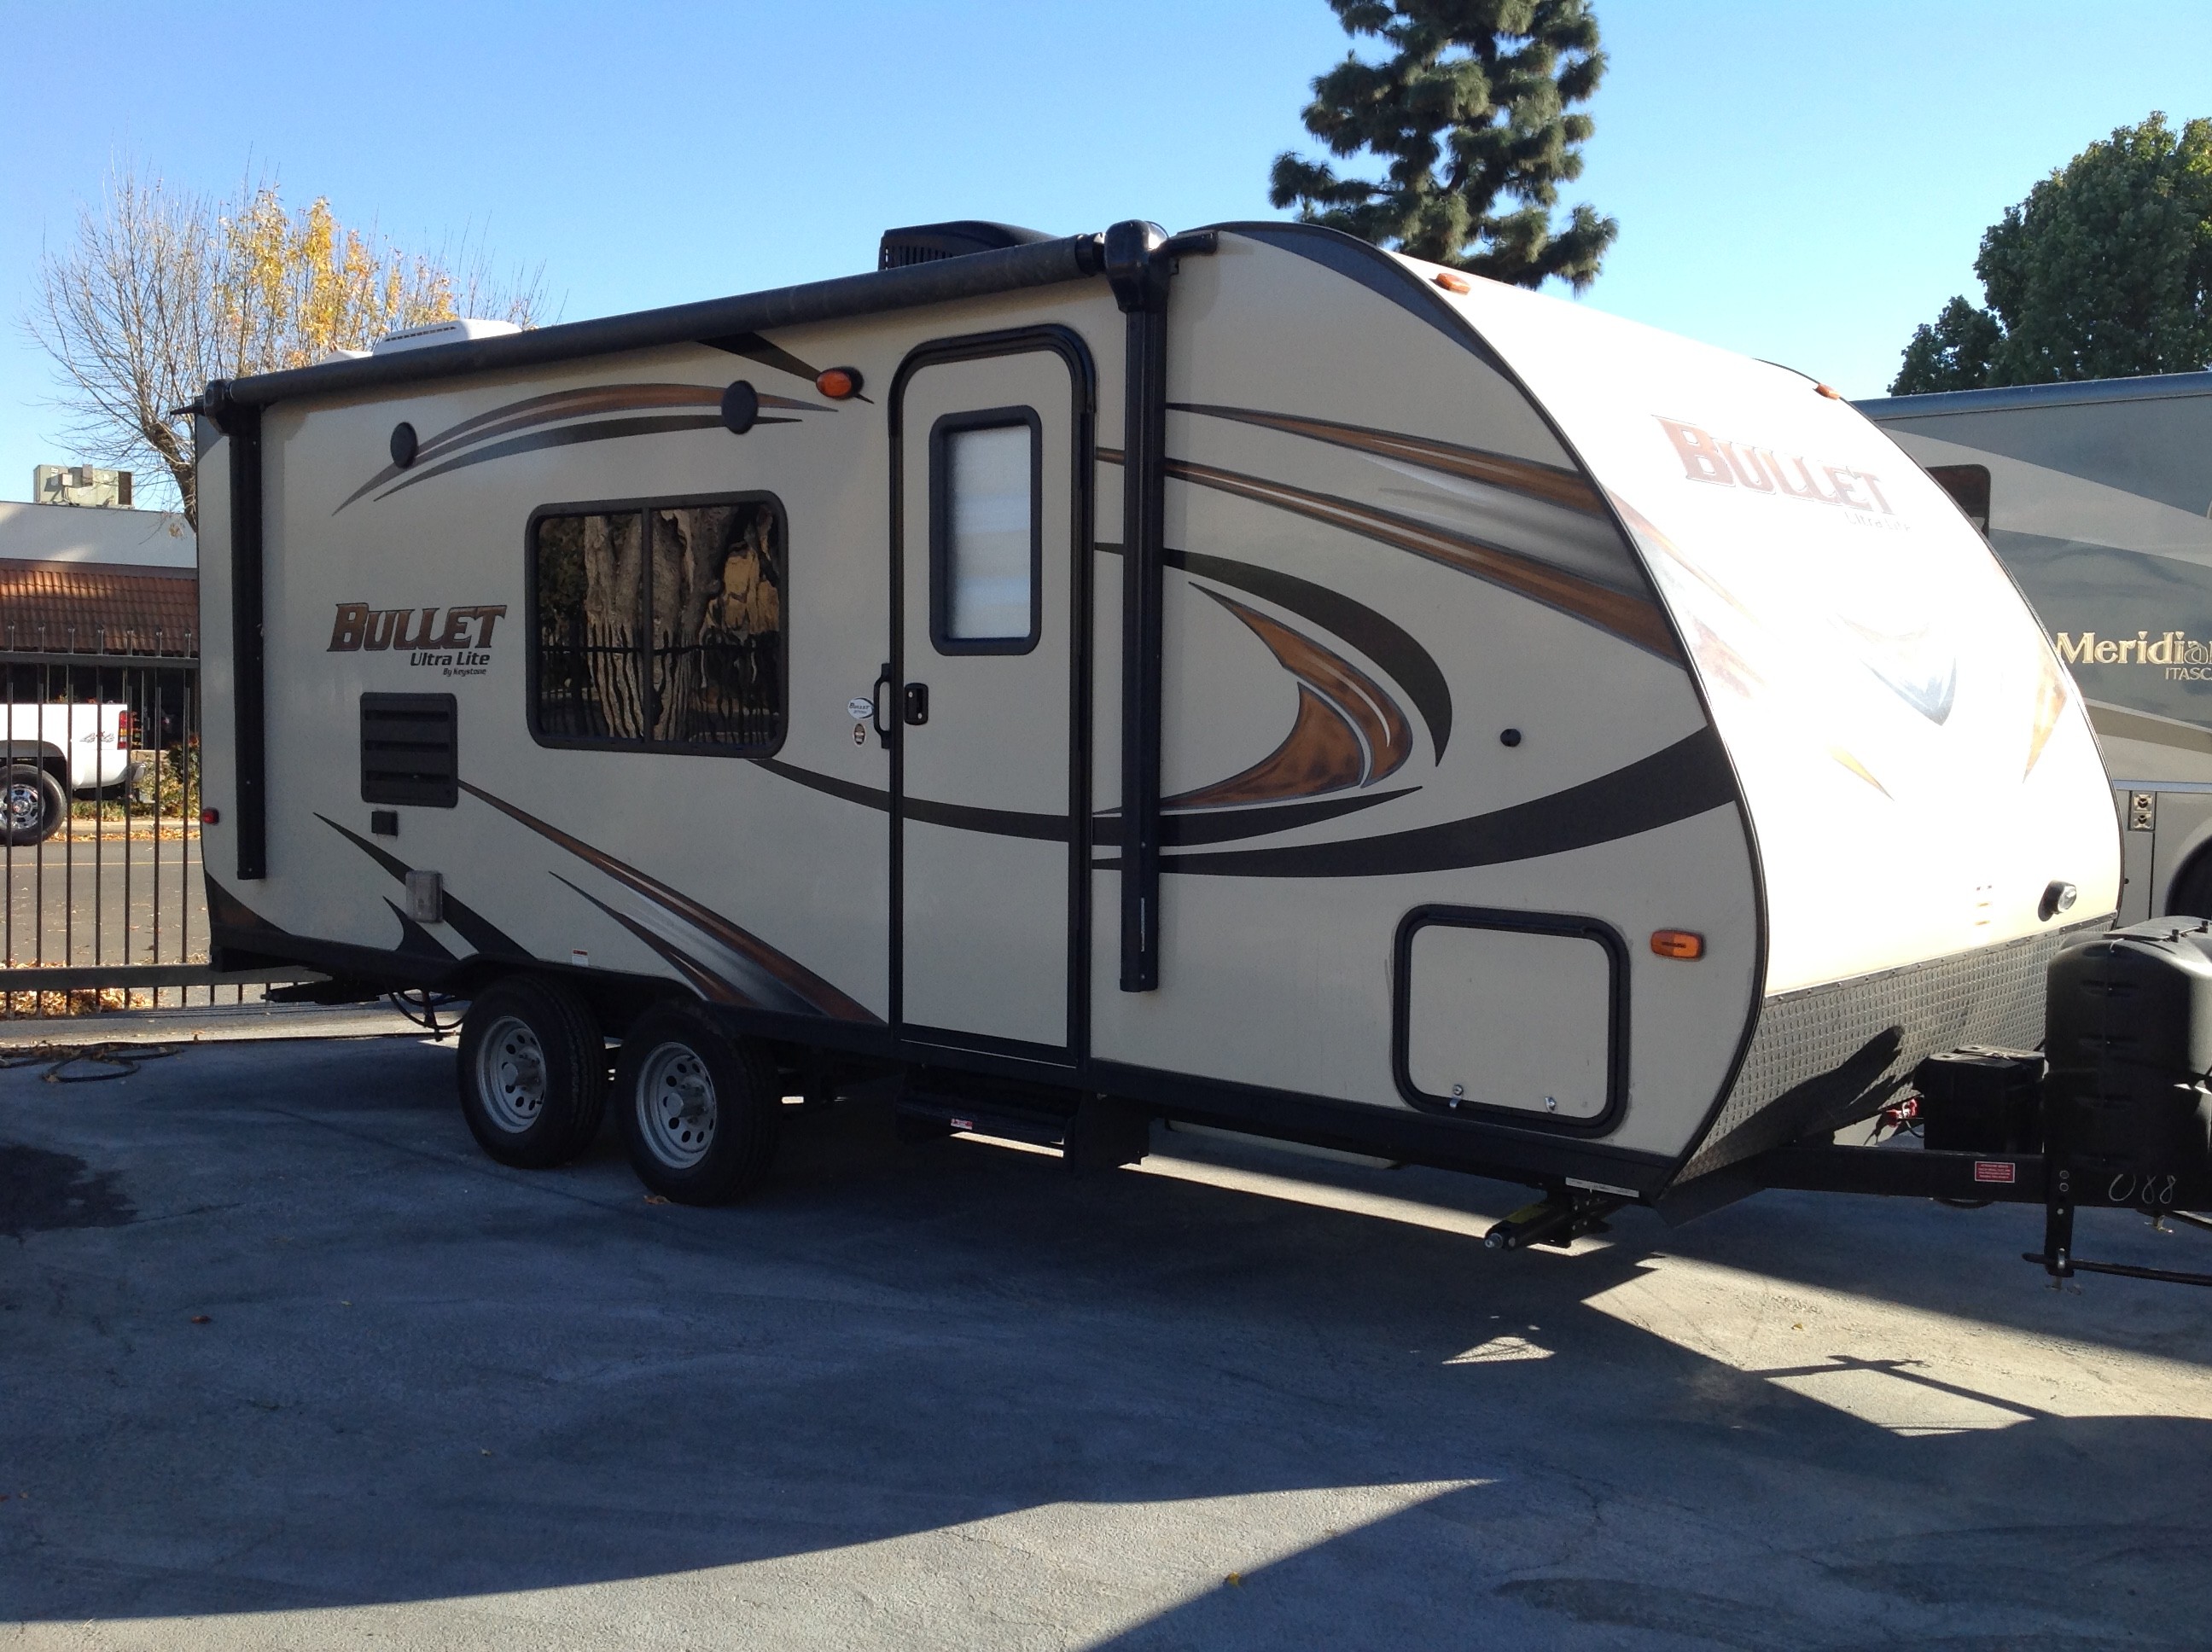 What Is a Travel Trailer?